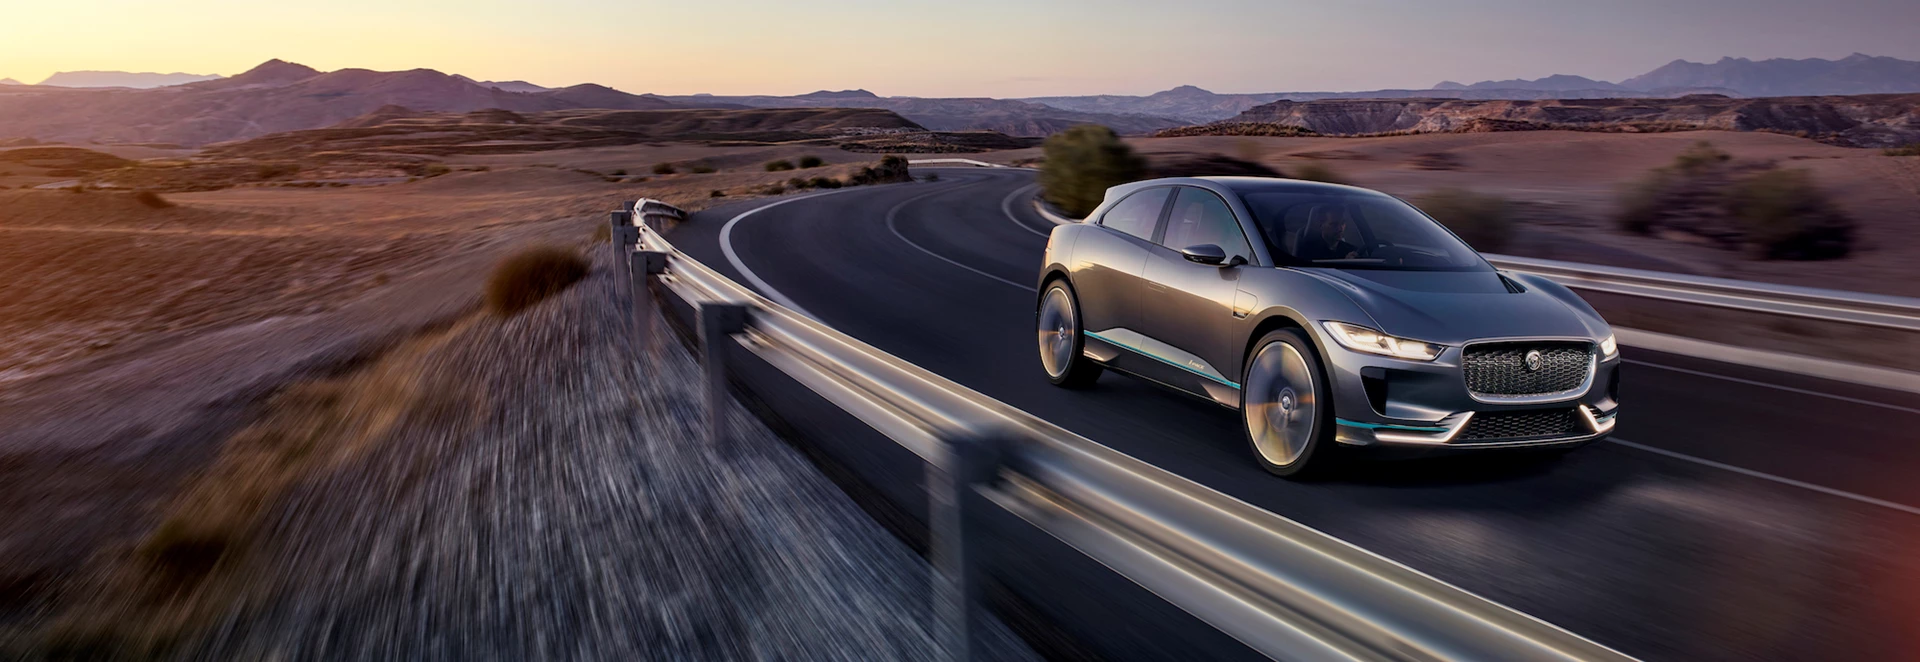 The 2018 Jaguar I-Pace EV is the car of the future